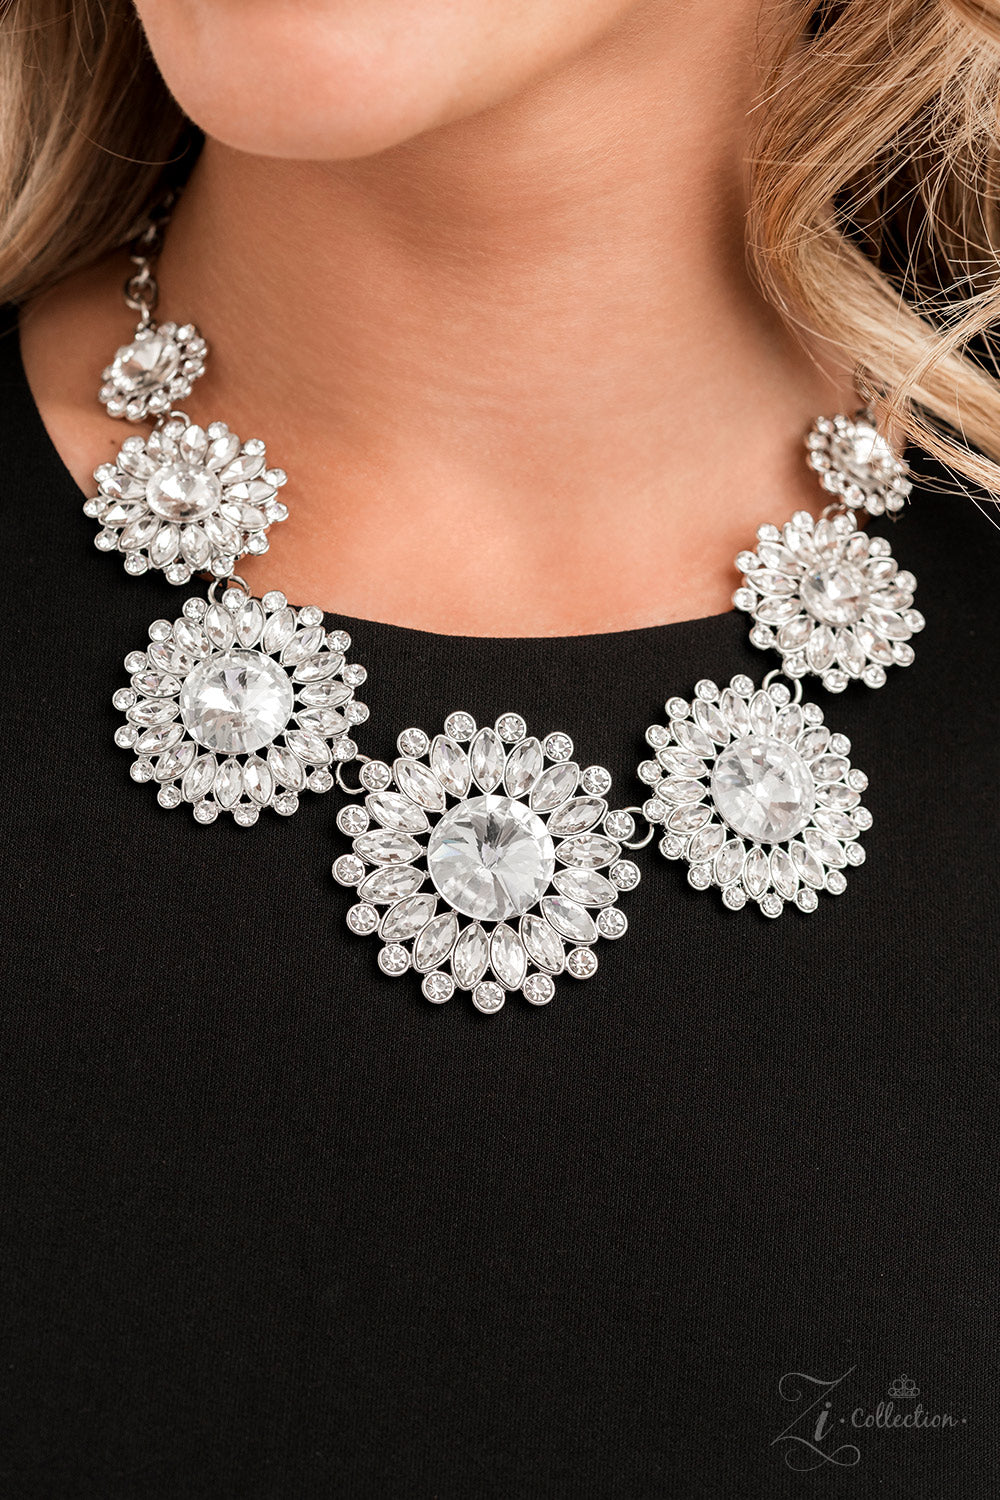 Oversized classic white rhinestones are encircled by majestic marquise-cut rhinestones in the same radiant finish, creating a collection of stunning floral frames. Smaller white rhinestones fall in between each gorgeous marquise-cut petal, magnifying the shimmer emitted by the dramatically faceted surfaces of each piece. The glittery flowers increase in size as they link together along the neckline, leading to the largest frame at the center in a twinkling finish. Features an adjustable clasp closure.